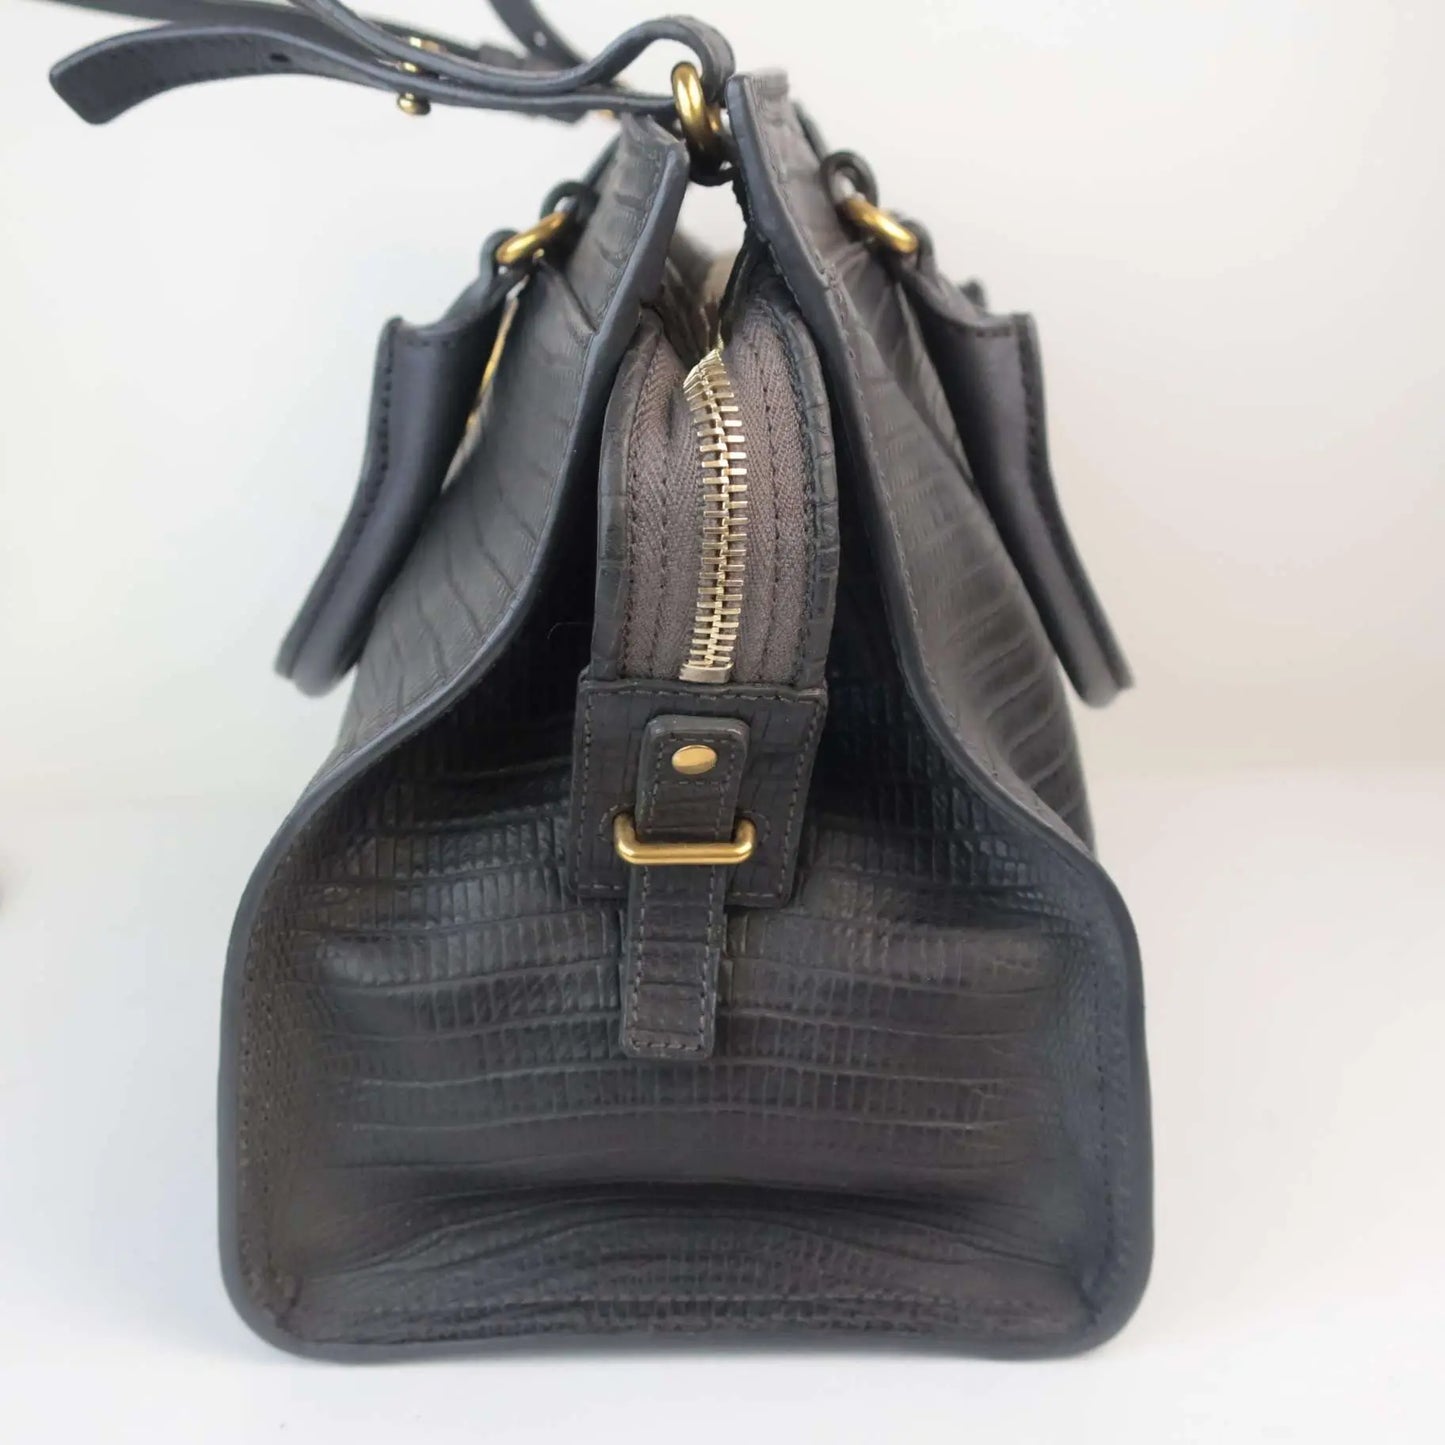 Load image into Gallery viewer, YSL Yves Saint Laurent Small Cabas Crossbody Bag LVBagaholic
